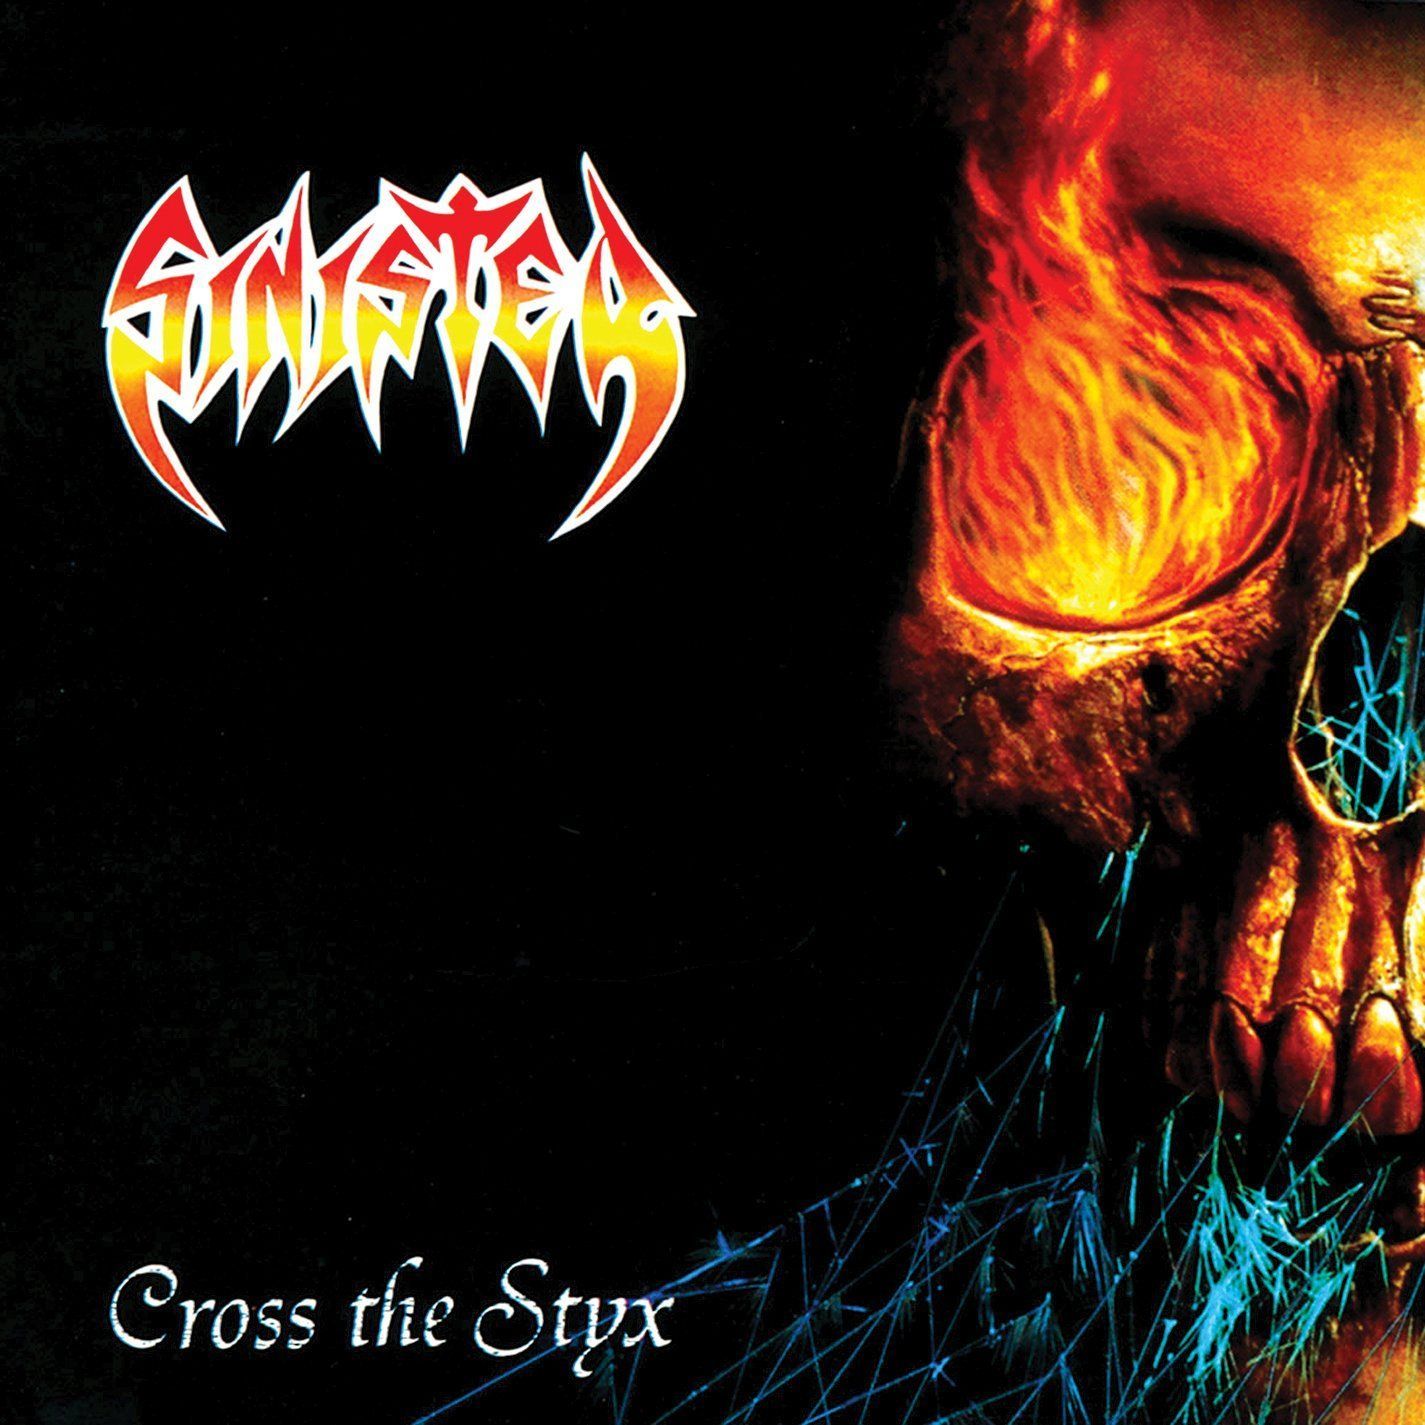 Sinister the Styx. Death metal, Metal albums, Metal bands